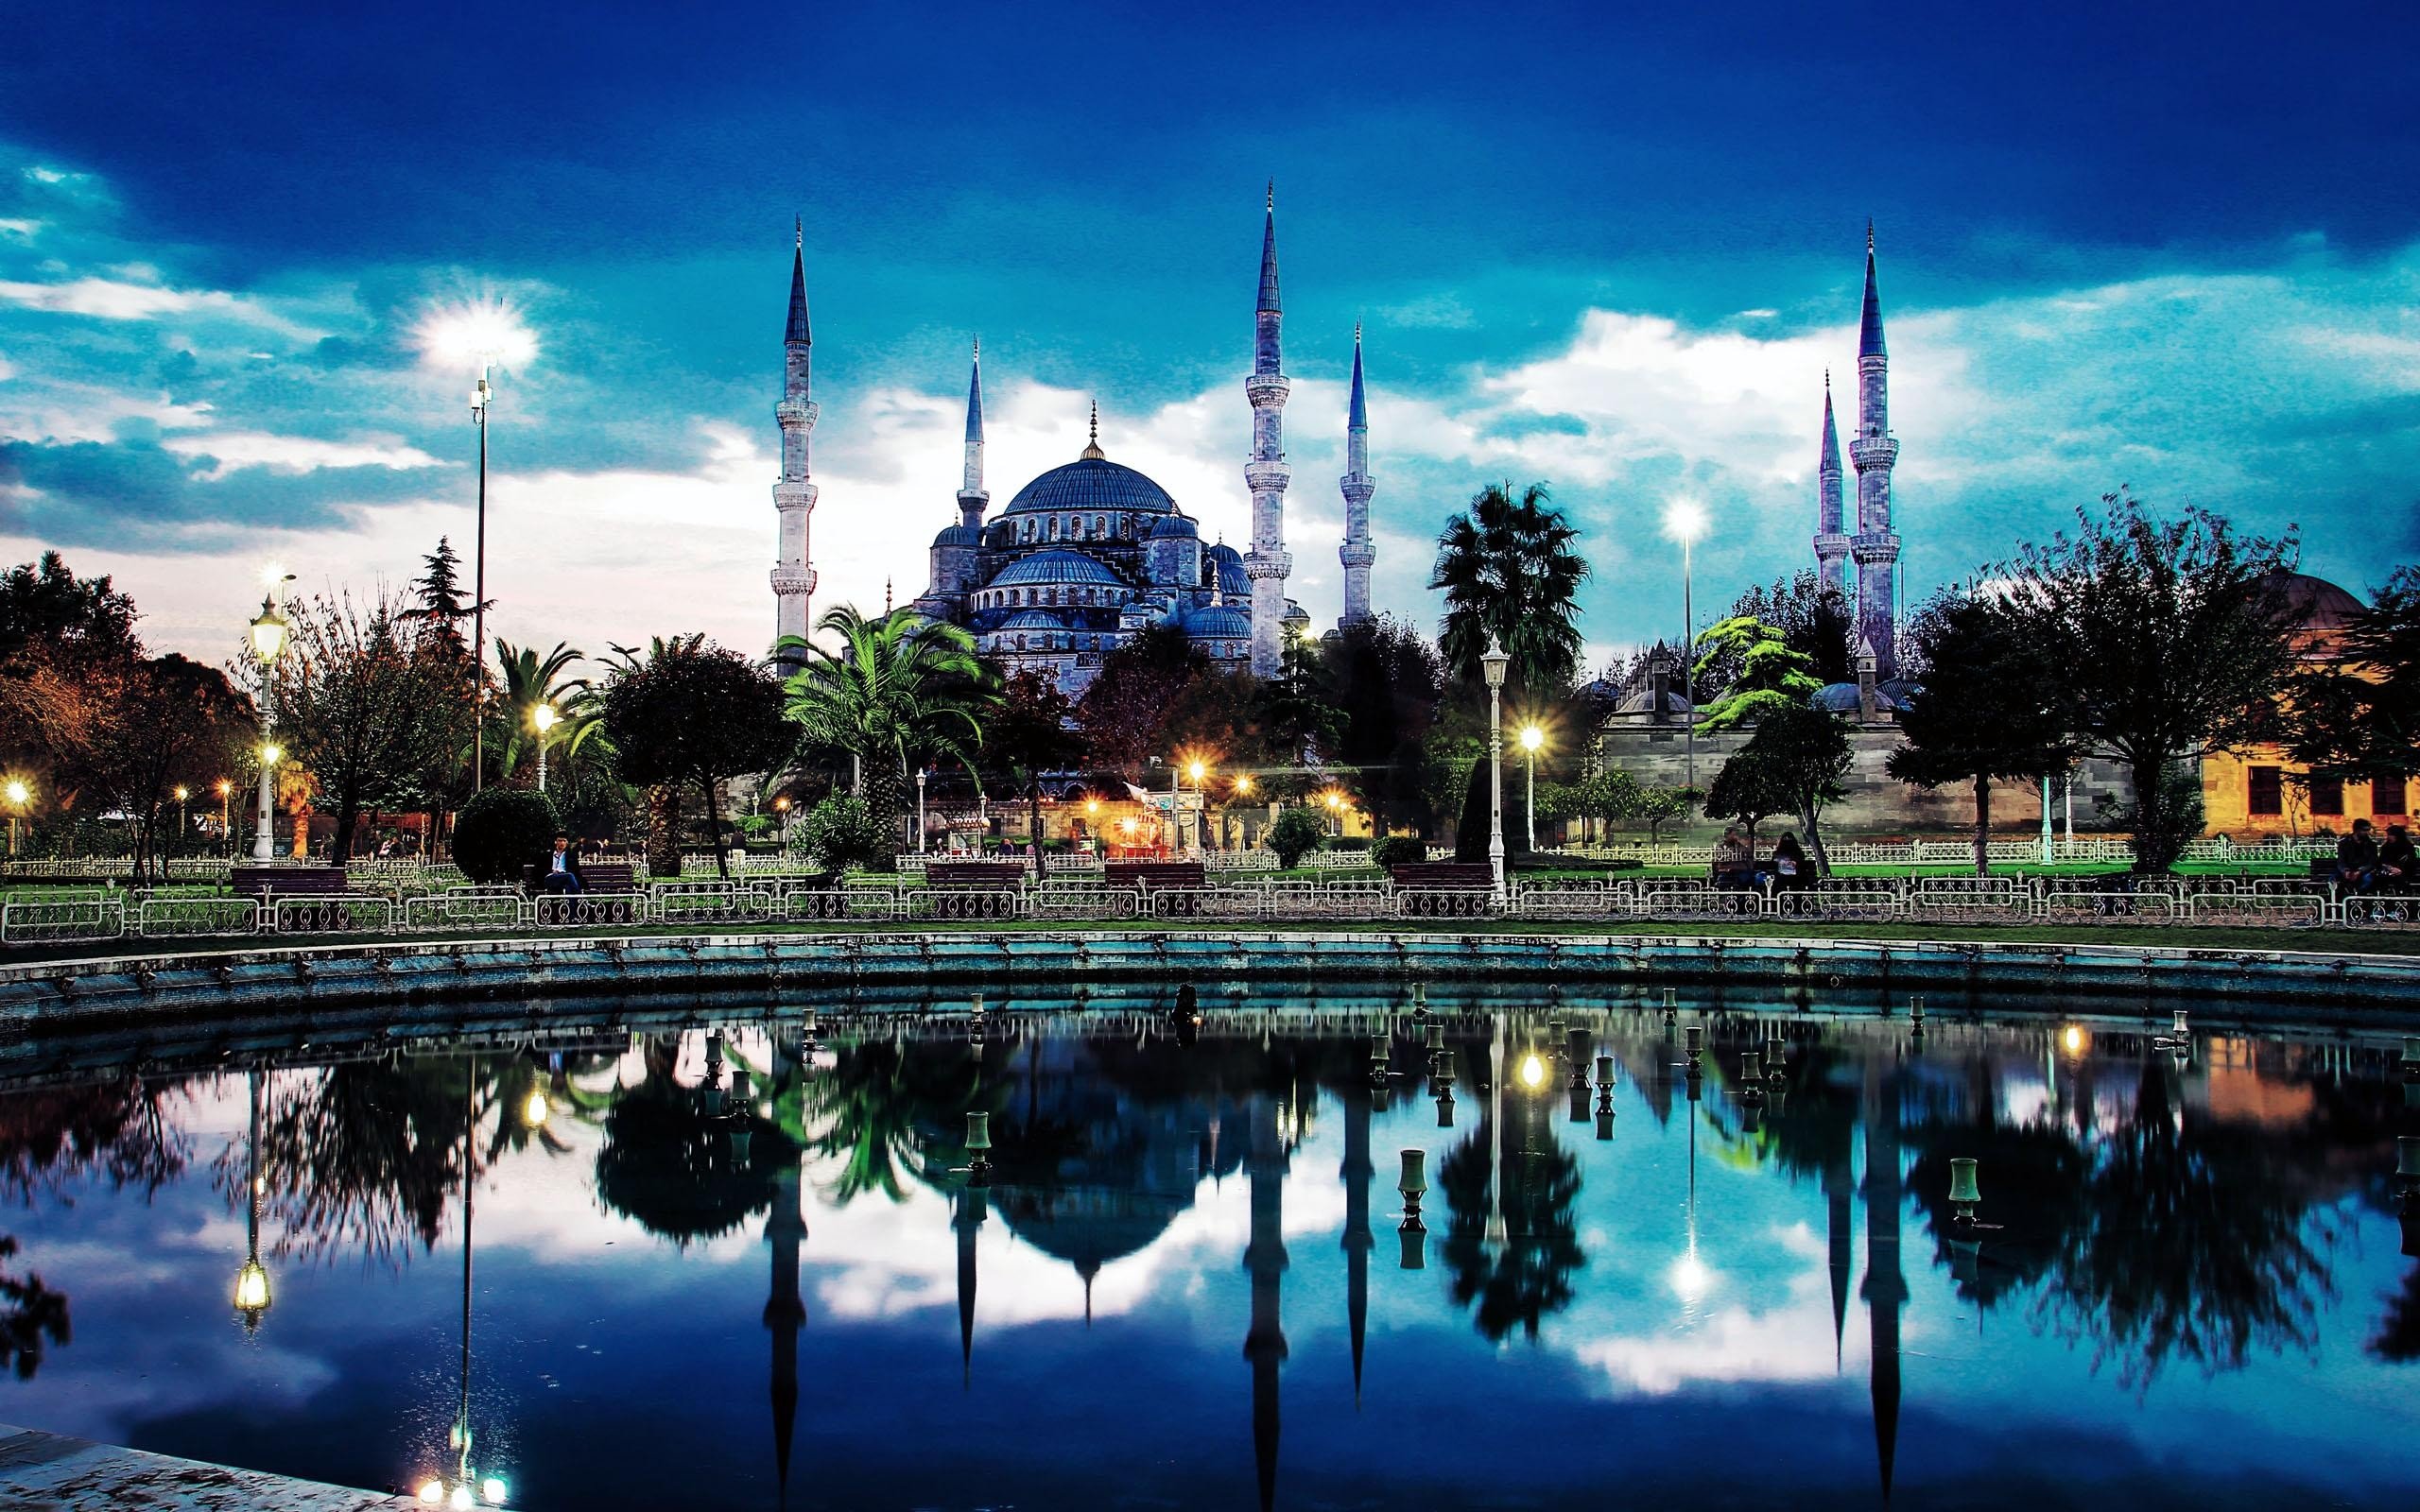 Turkey, Islamic architecture, Reflection, Sultan Ahmed Mosque, Istanbul